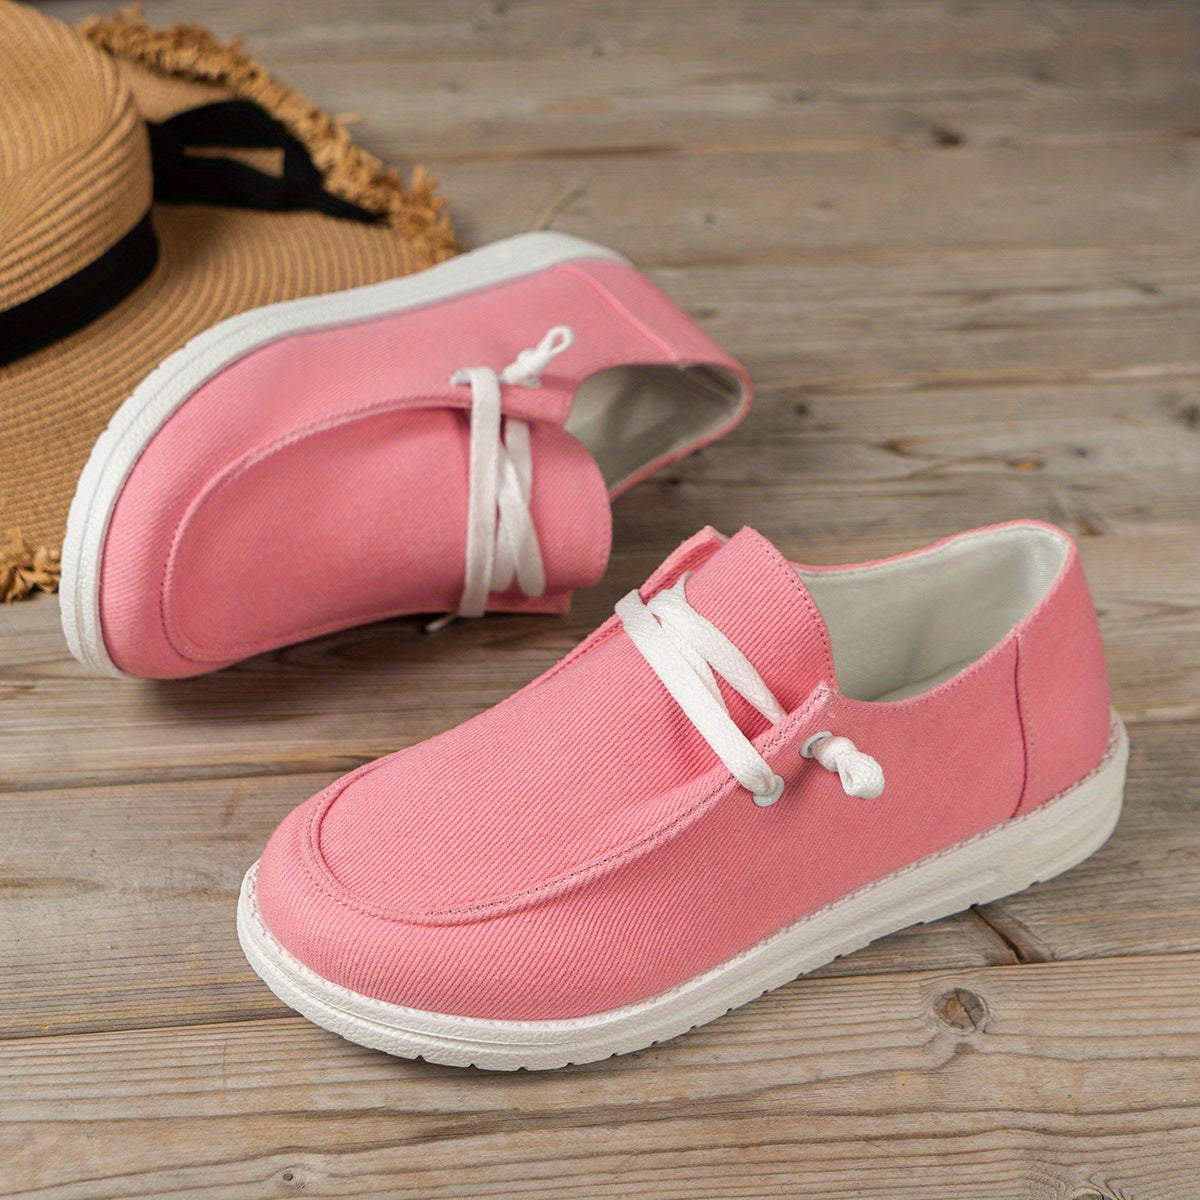 Low Top Canvas Shoes, Slip On Flat Loafers